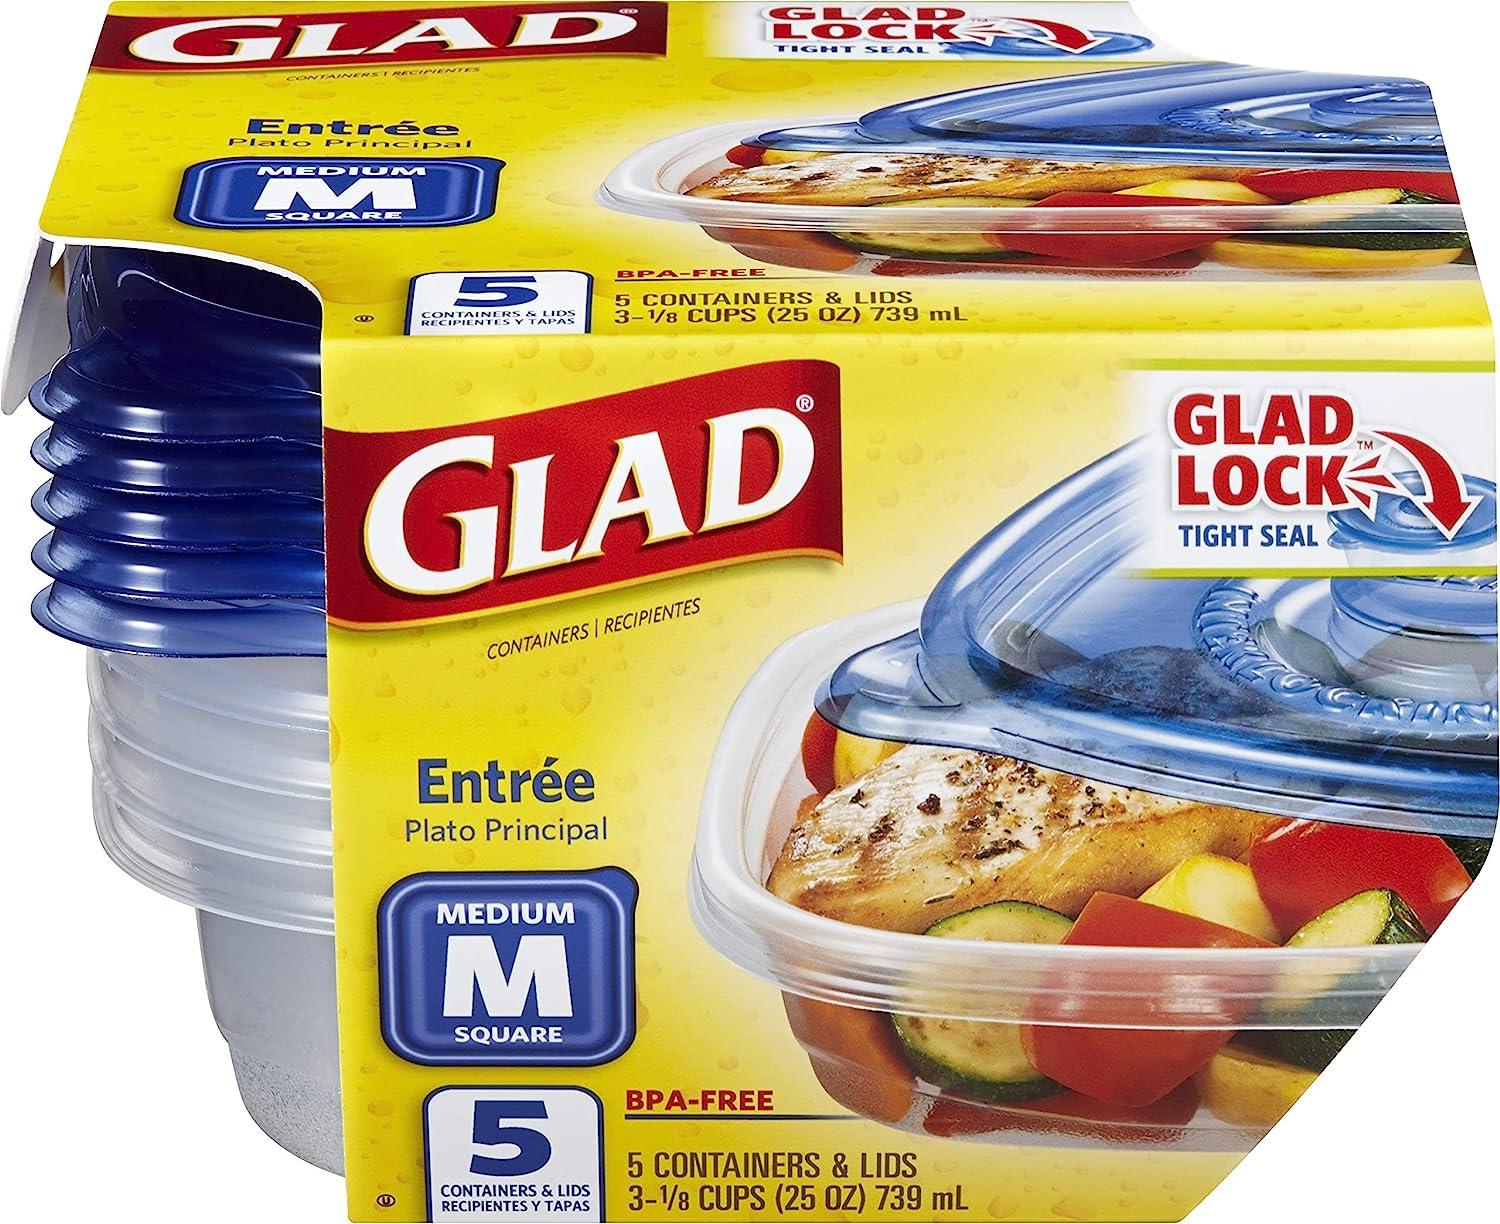 glad lockware food storage containers extra small from